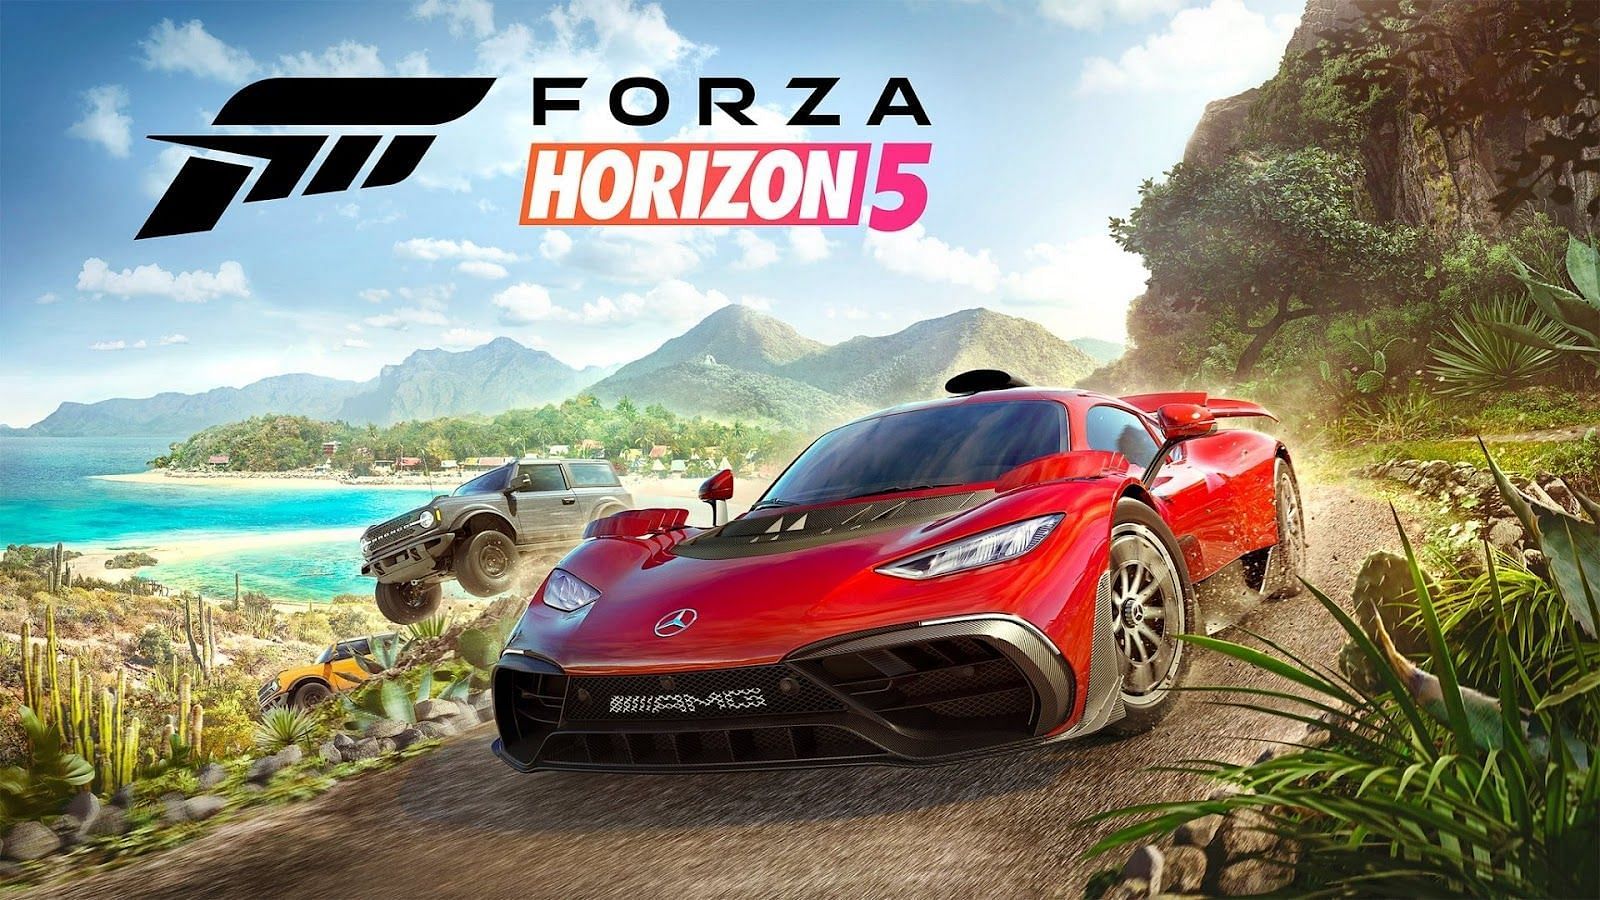 Forza Horizon 5 is finally out for players to enjoy. (Image by Playground Games)